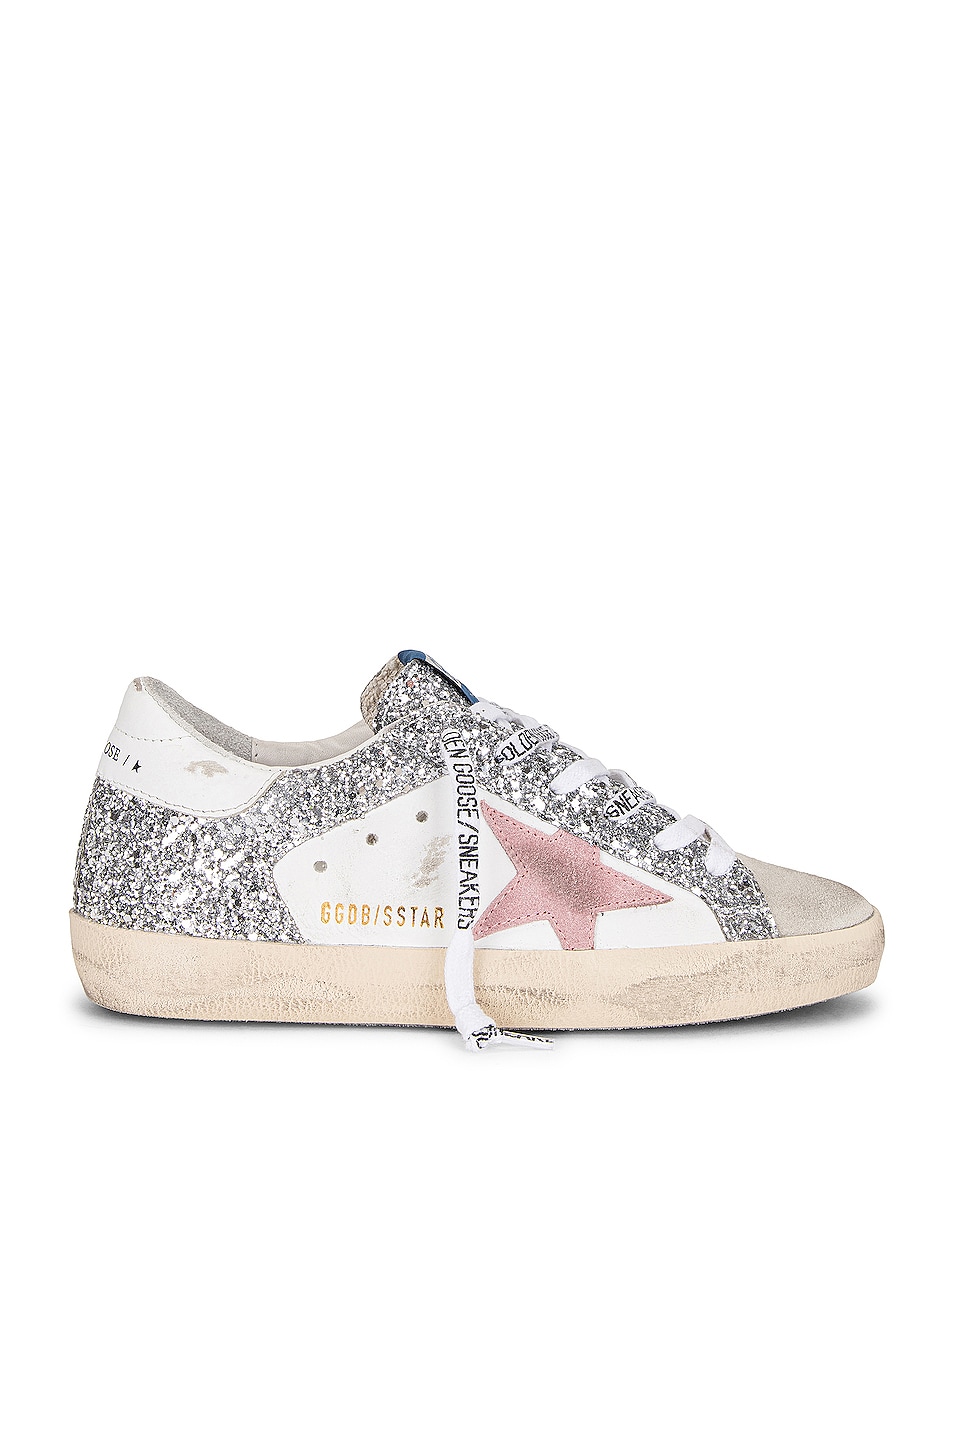 Image 1 of Golden Goose Superstar Sneaker in Ice, White, Silver, & Pink